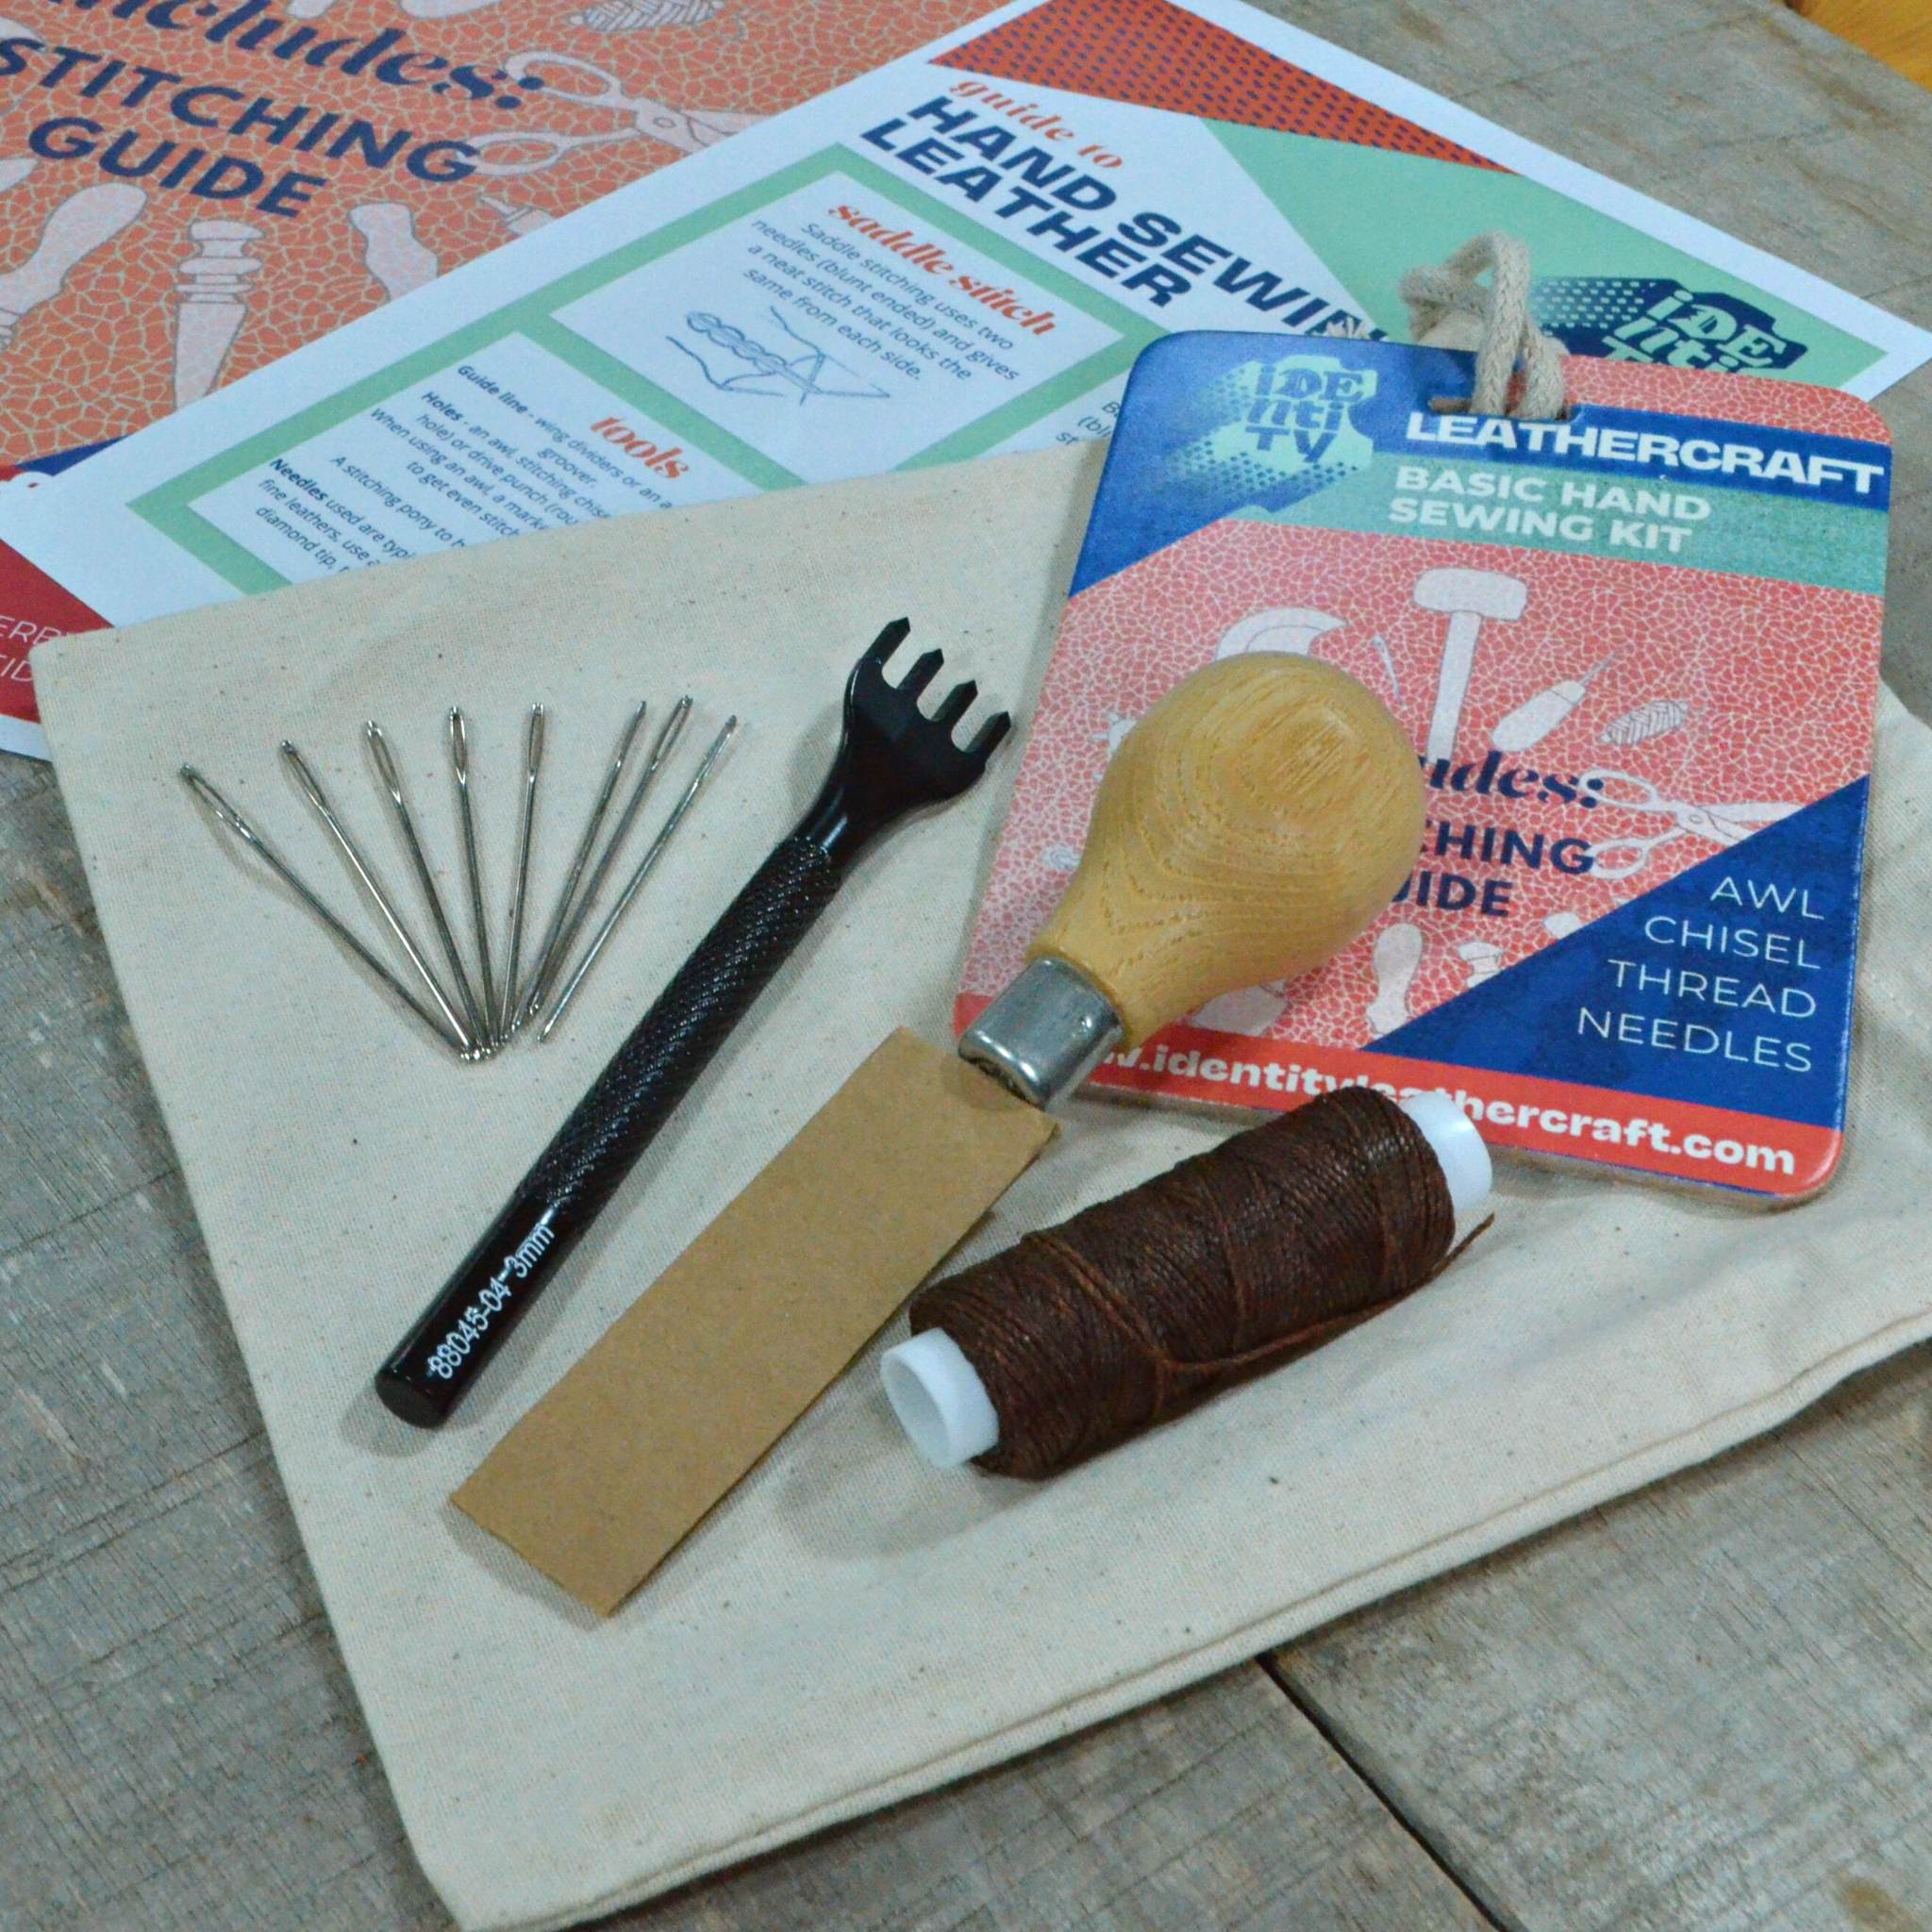 This useful pack will give you a start for hand sewing leather and is ideal for small beginner projects such as card cases, keyrings, and also ideal for repairs